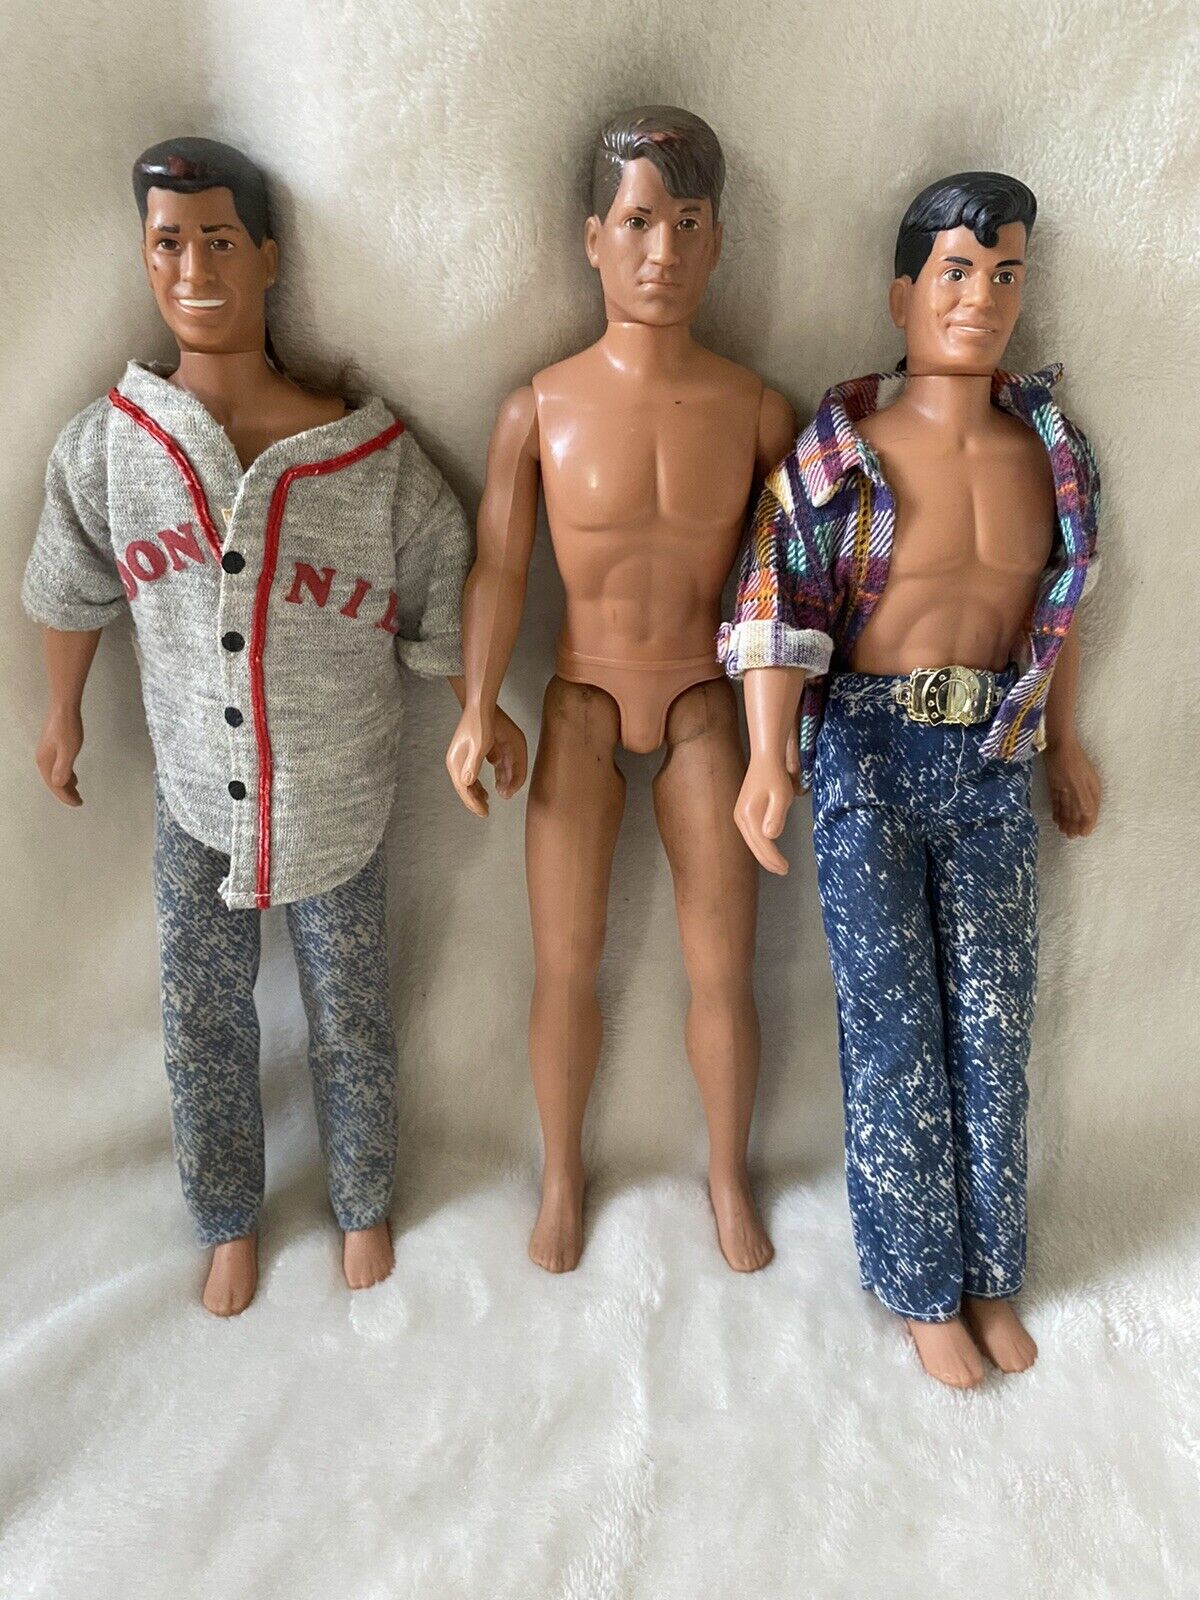 Lot Of 3 Vintage 1990 New Kids On The Block Toy Dolls Figures W/ RatTail Mullets